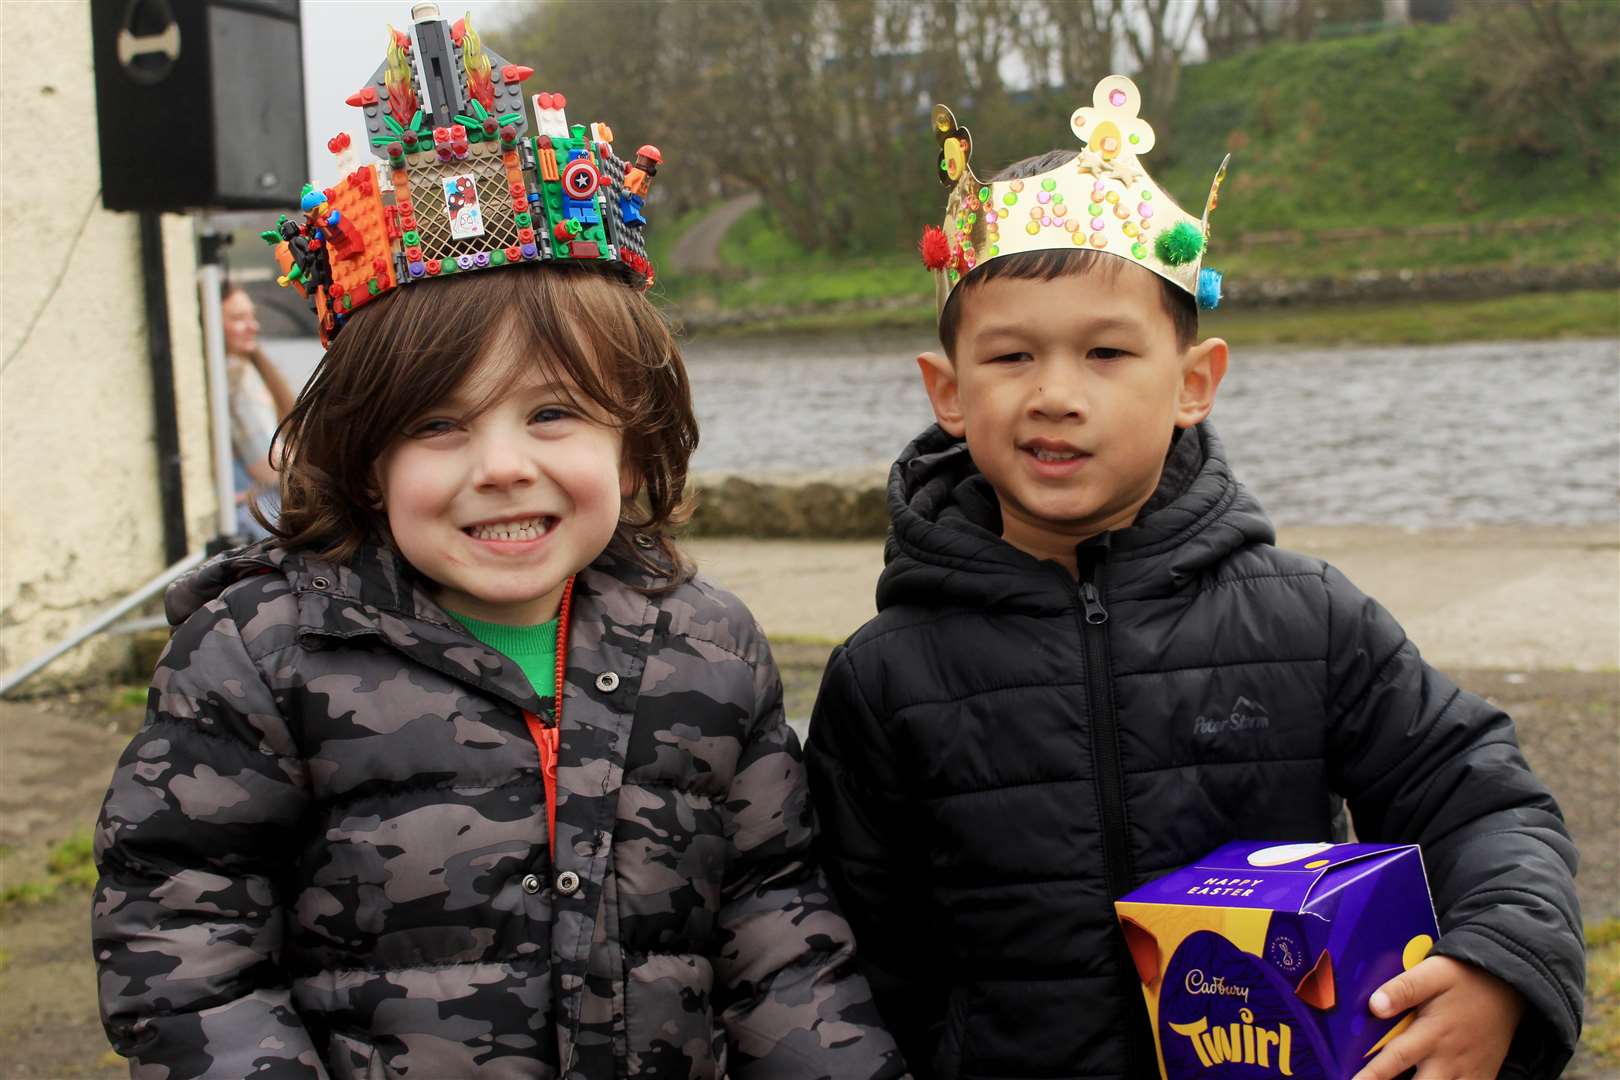 Boys' crown competition winner Leo Risbridger (4), on the left, and joint runner-up Ryan Budge (3). Picture: Alan Hendry